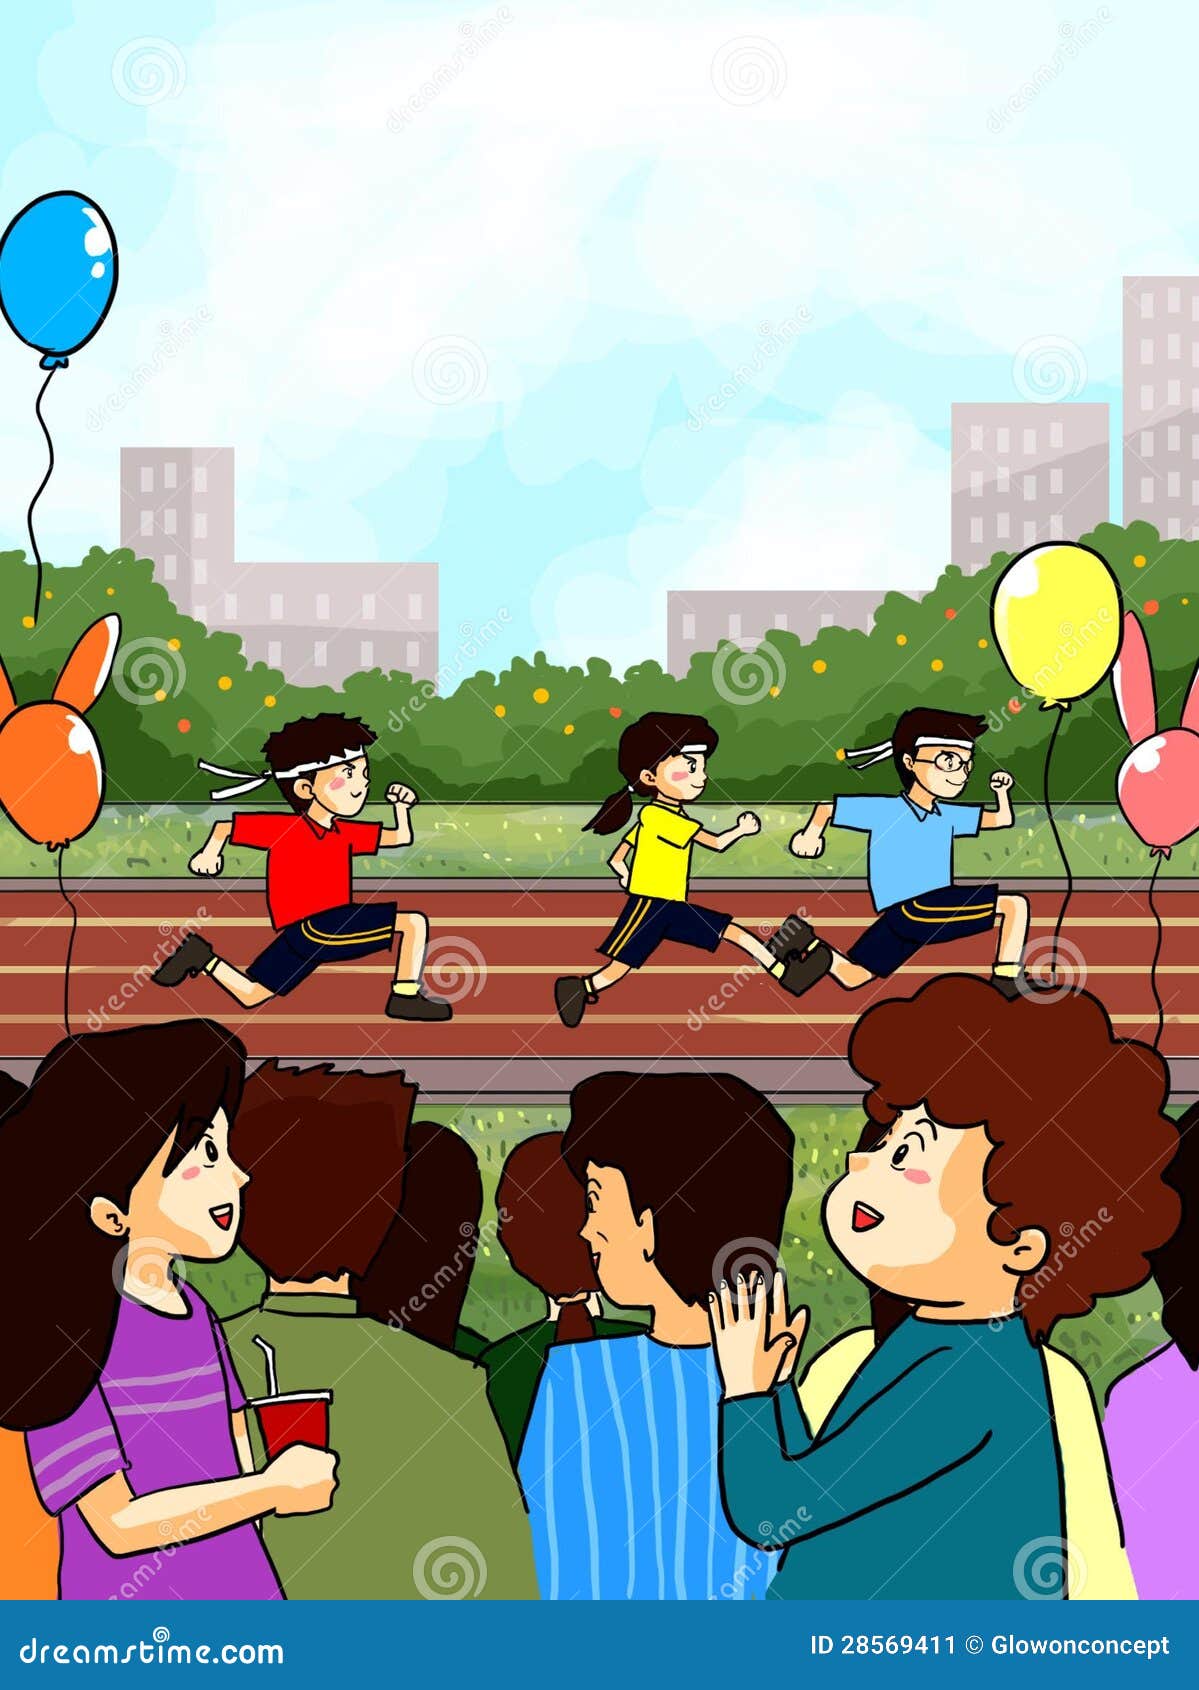 Family Cheering At School Sport Day Stock Illustration - Image: 28569411